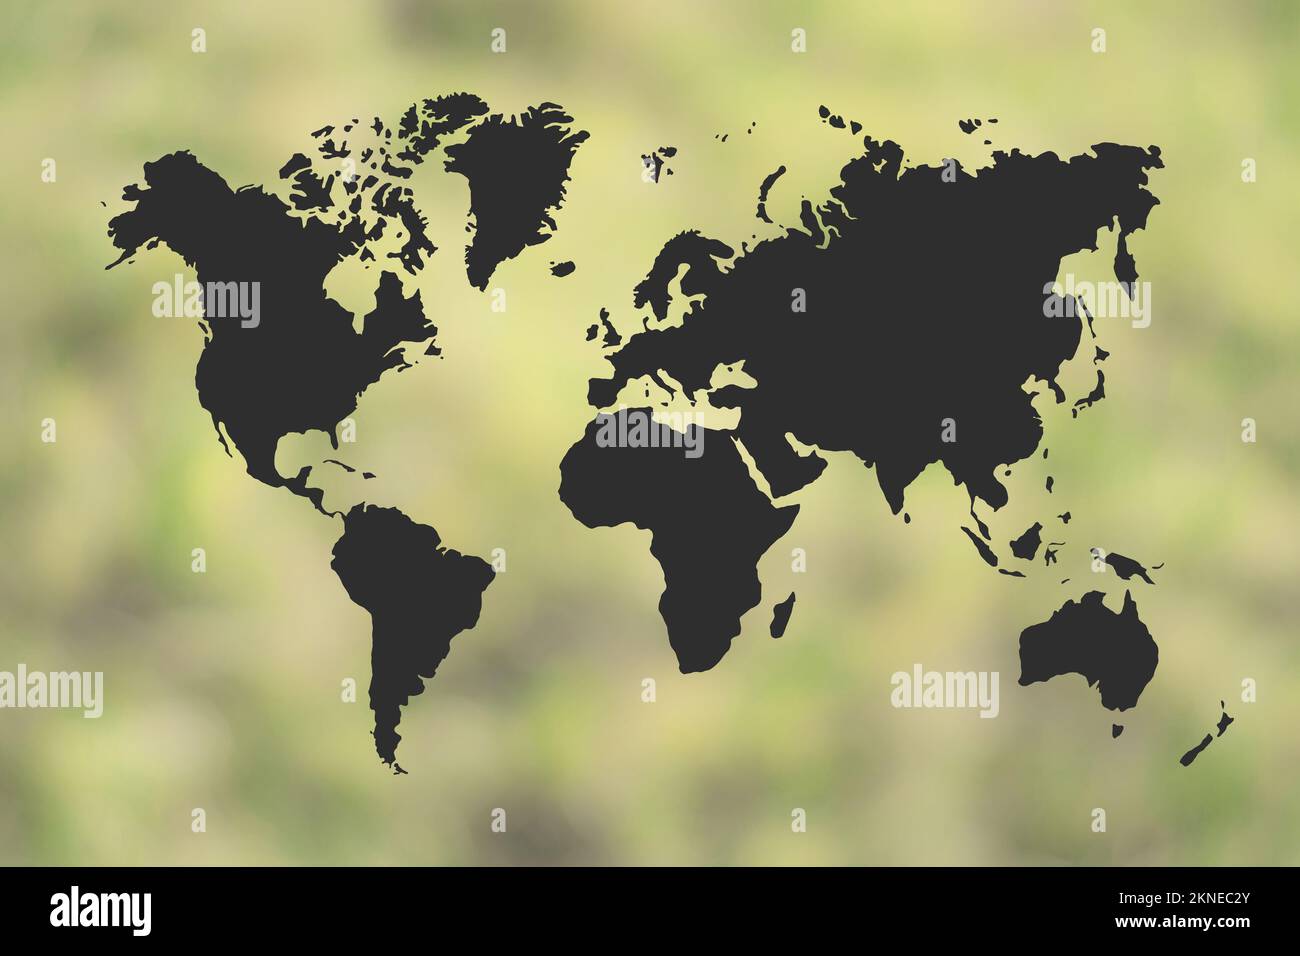 world map and defocused background Stock Photo